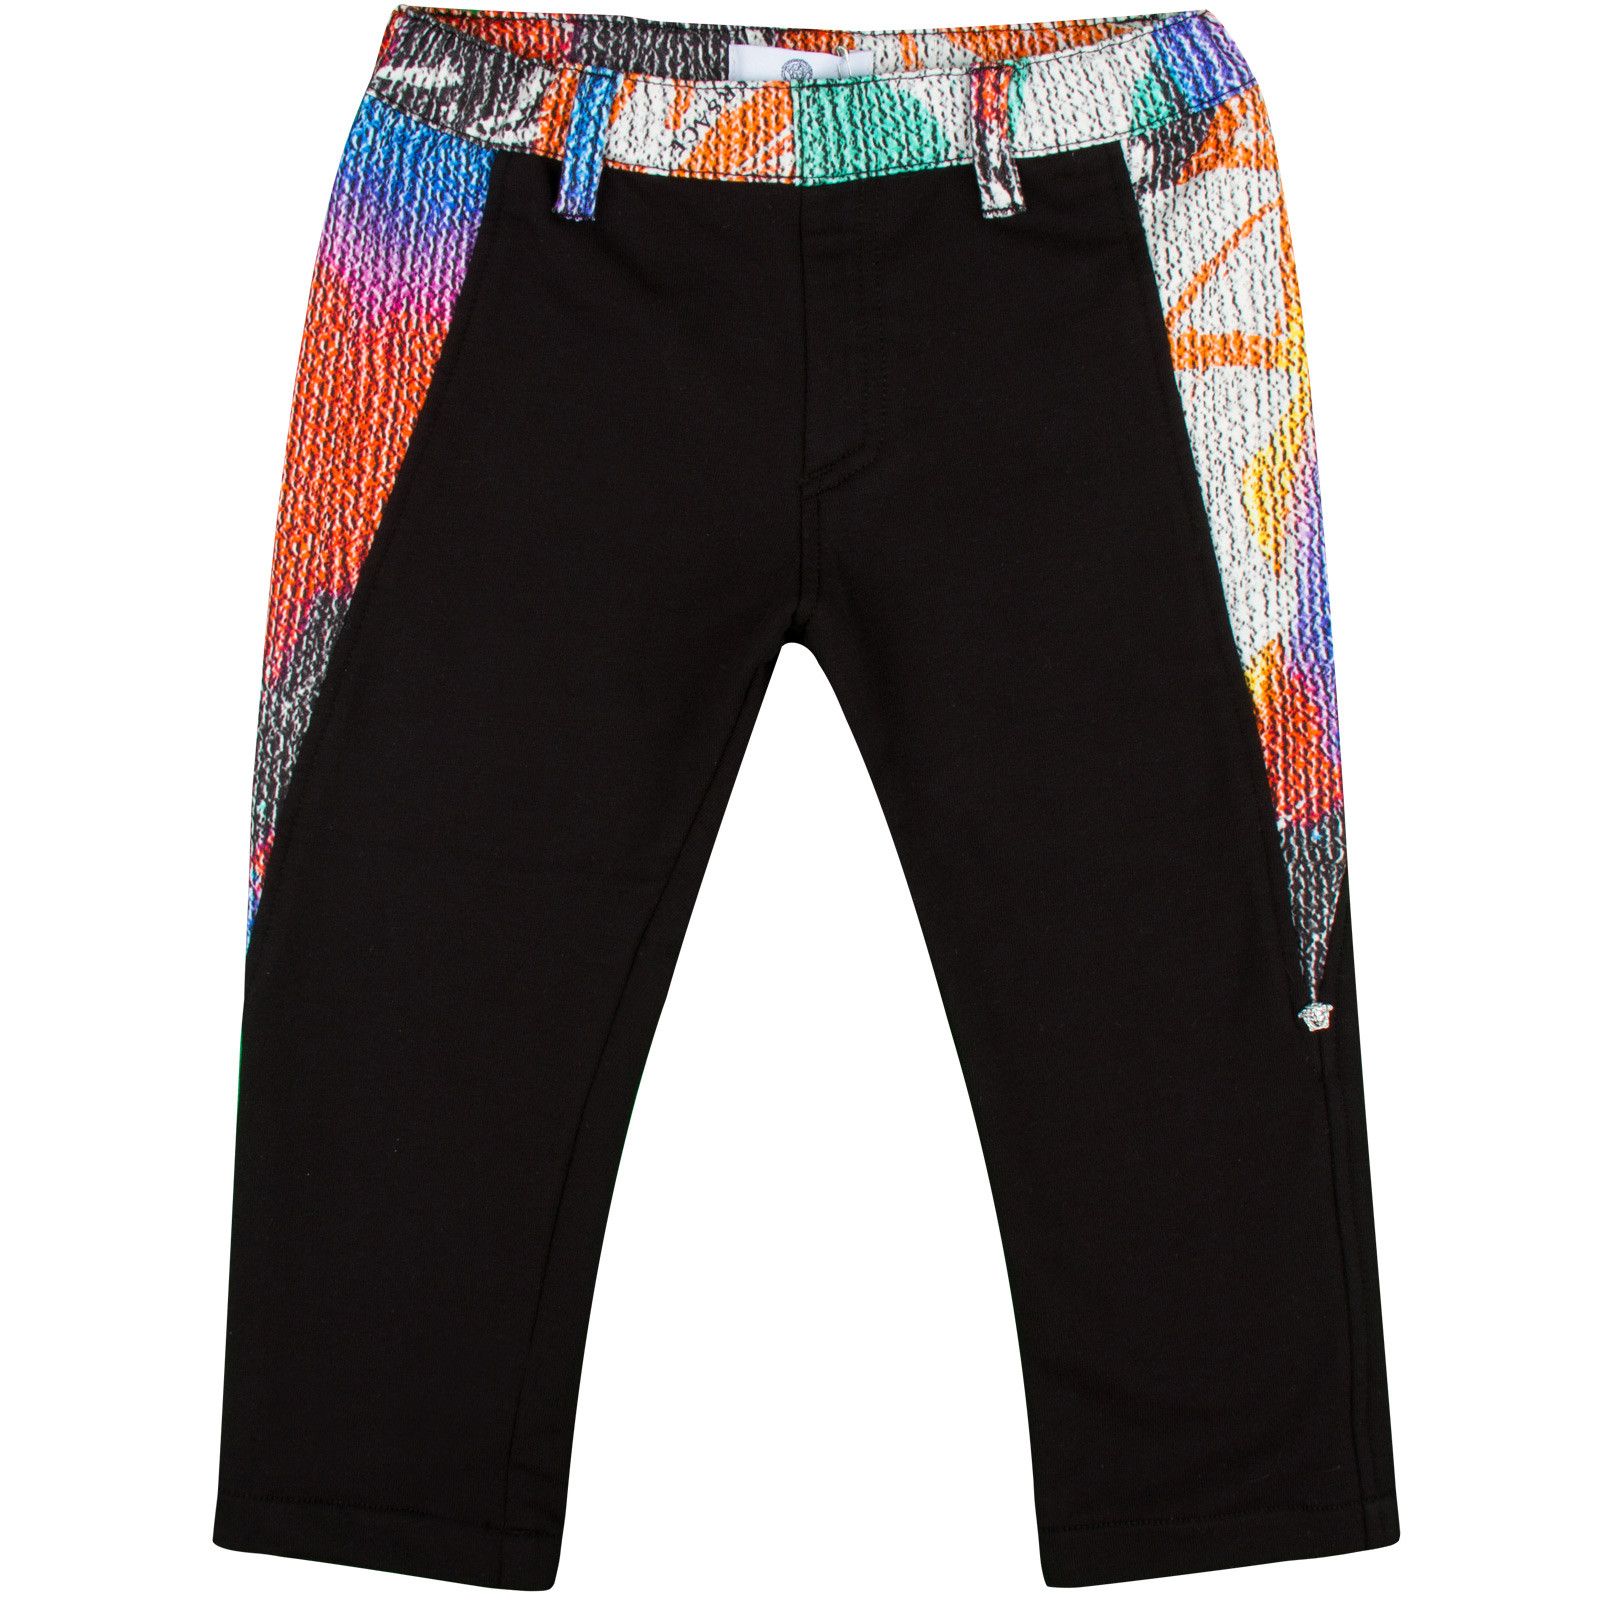 Baby Boys Black Trousers With Multicolor Elasticated Waistband - CÉMAROSE | Children's Fashion Store - 1